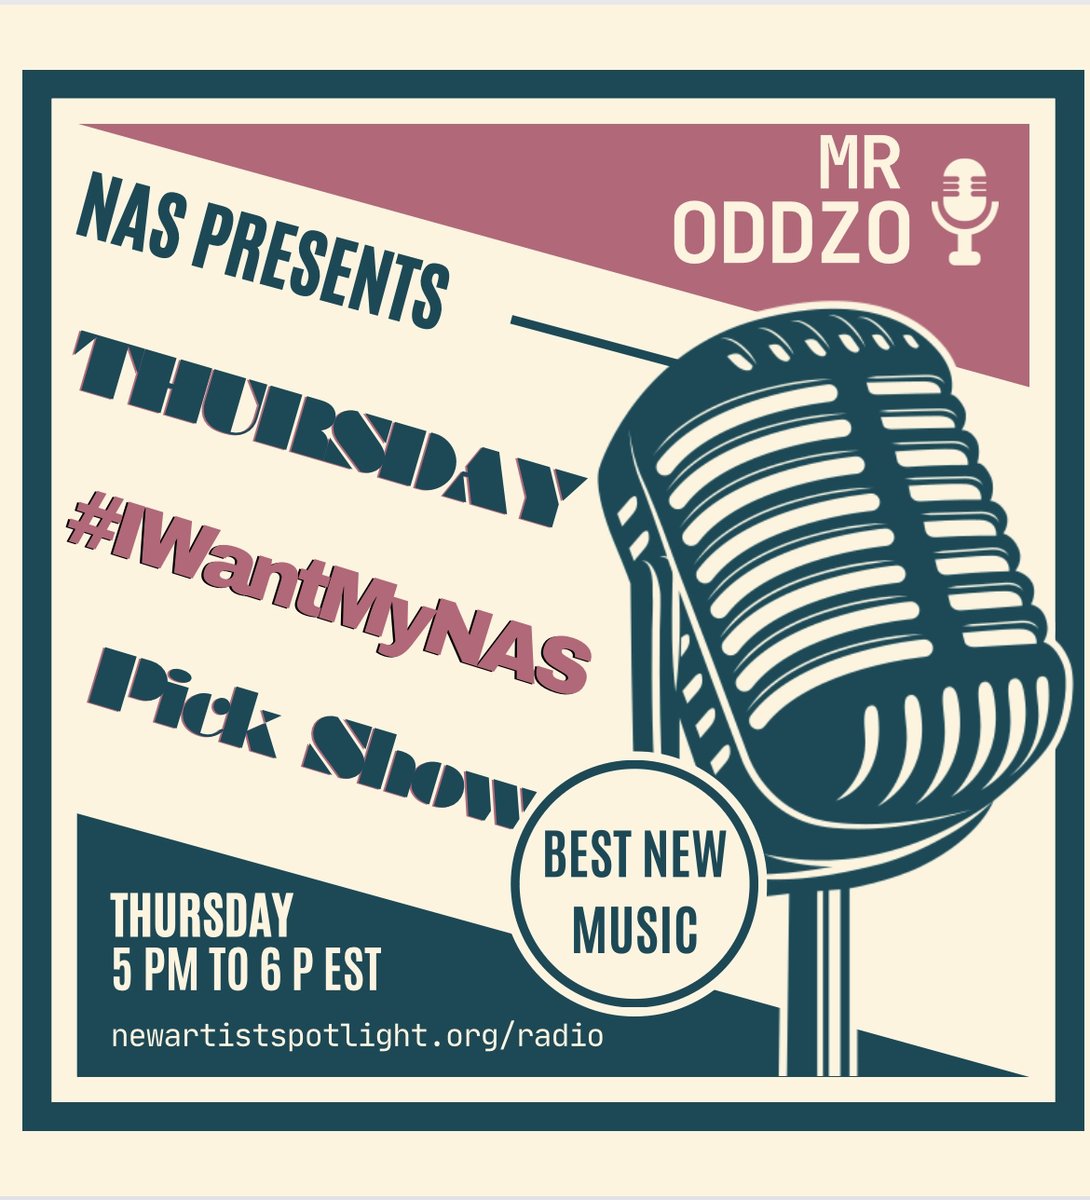 Today at 2PM PT | 5PM ET | 9PM GMT it's @MrOddzo's Thurs Pick Show! 🎯 Tune in for this week's @NAS_Spotlight pix! ft @xixmuxic @paulmccormusic @ElectricSolPHX @stevie_boyes @edeagle89 @BluesTrainer @TheKollaborator And, a premiere from @GavanWaldby newartistspotlight.org/radio